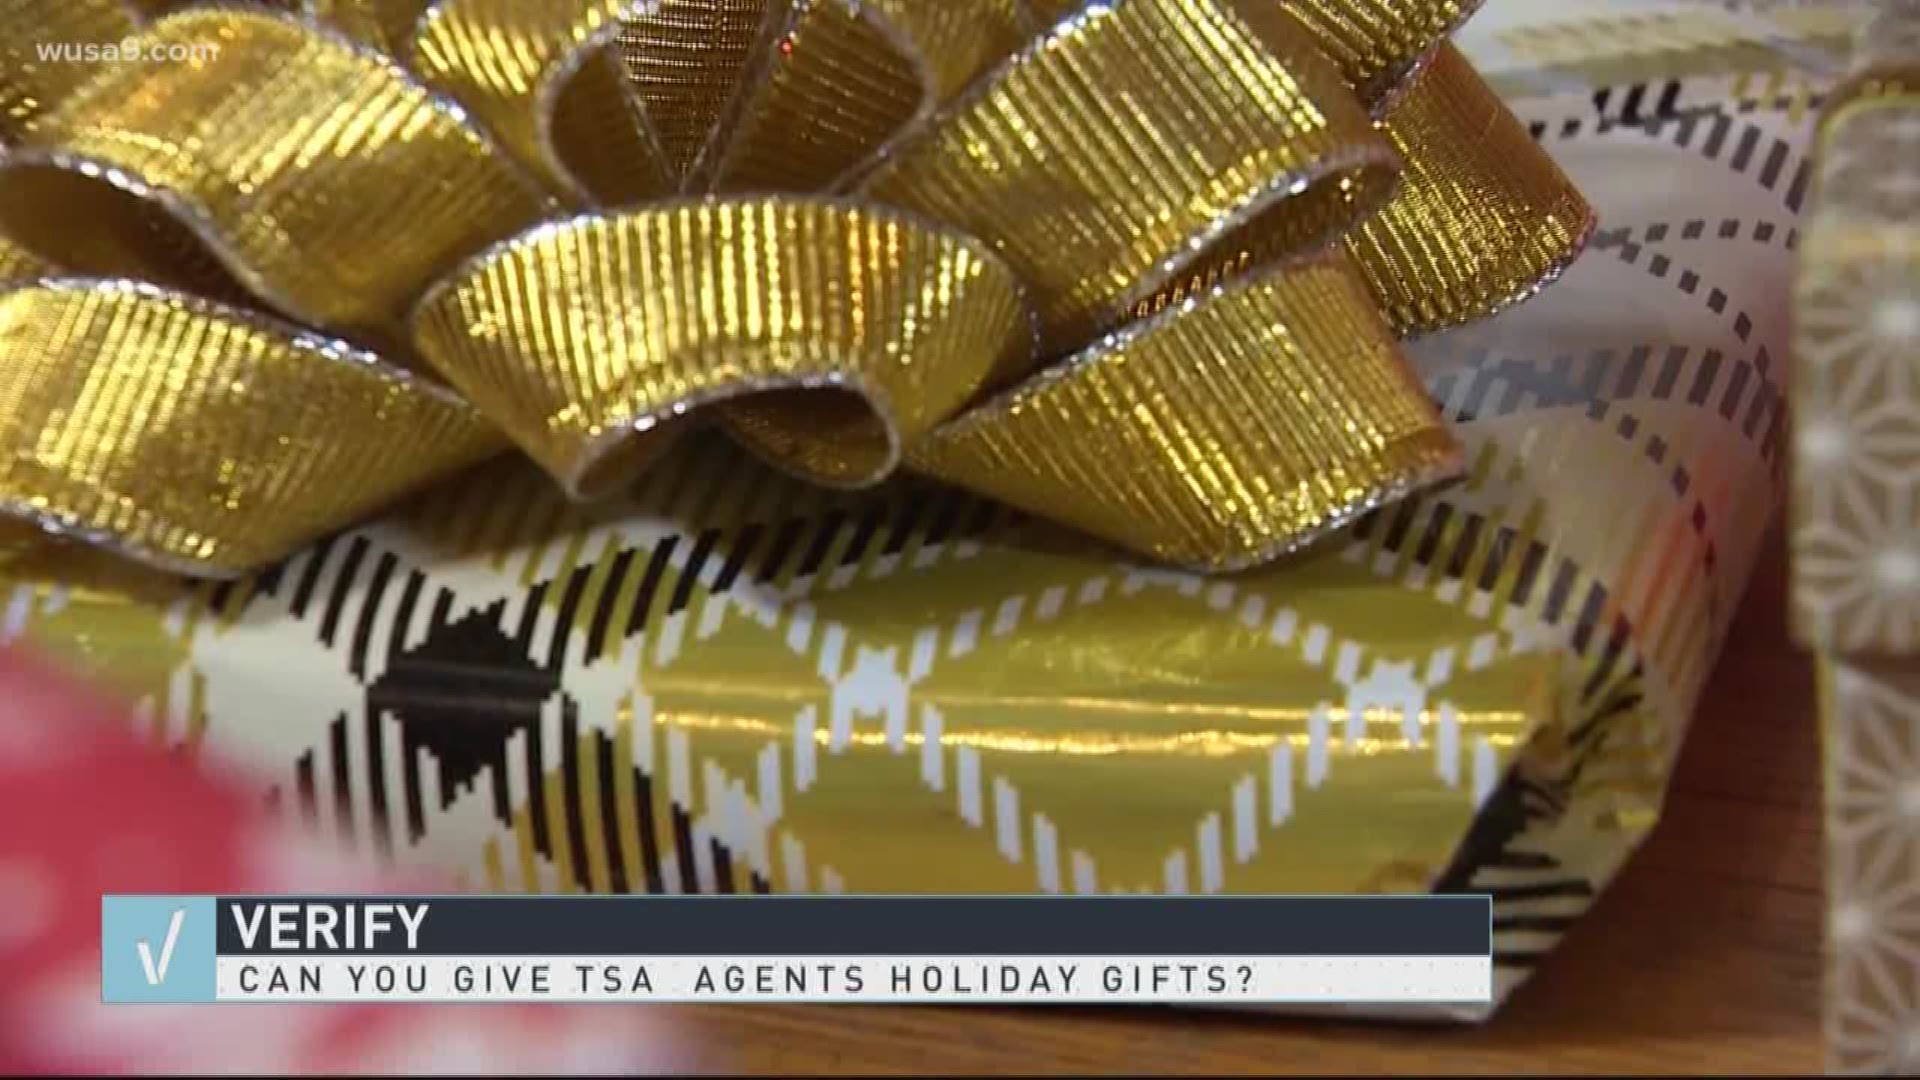 No, TSA officers are prohibited from accepting gifts of any kind from the public.